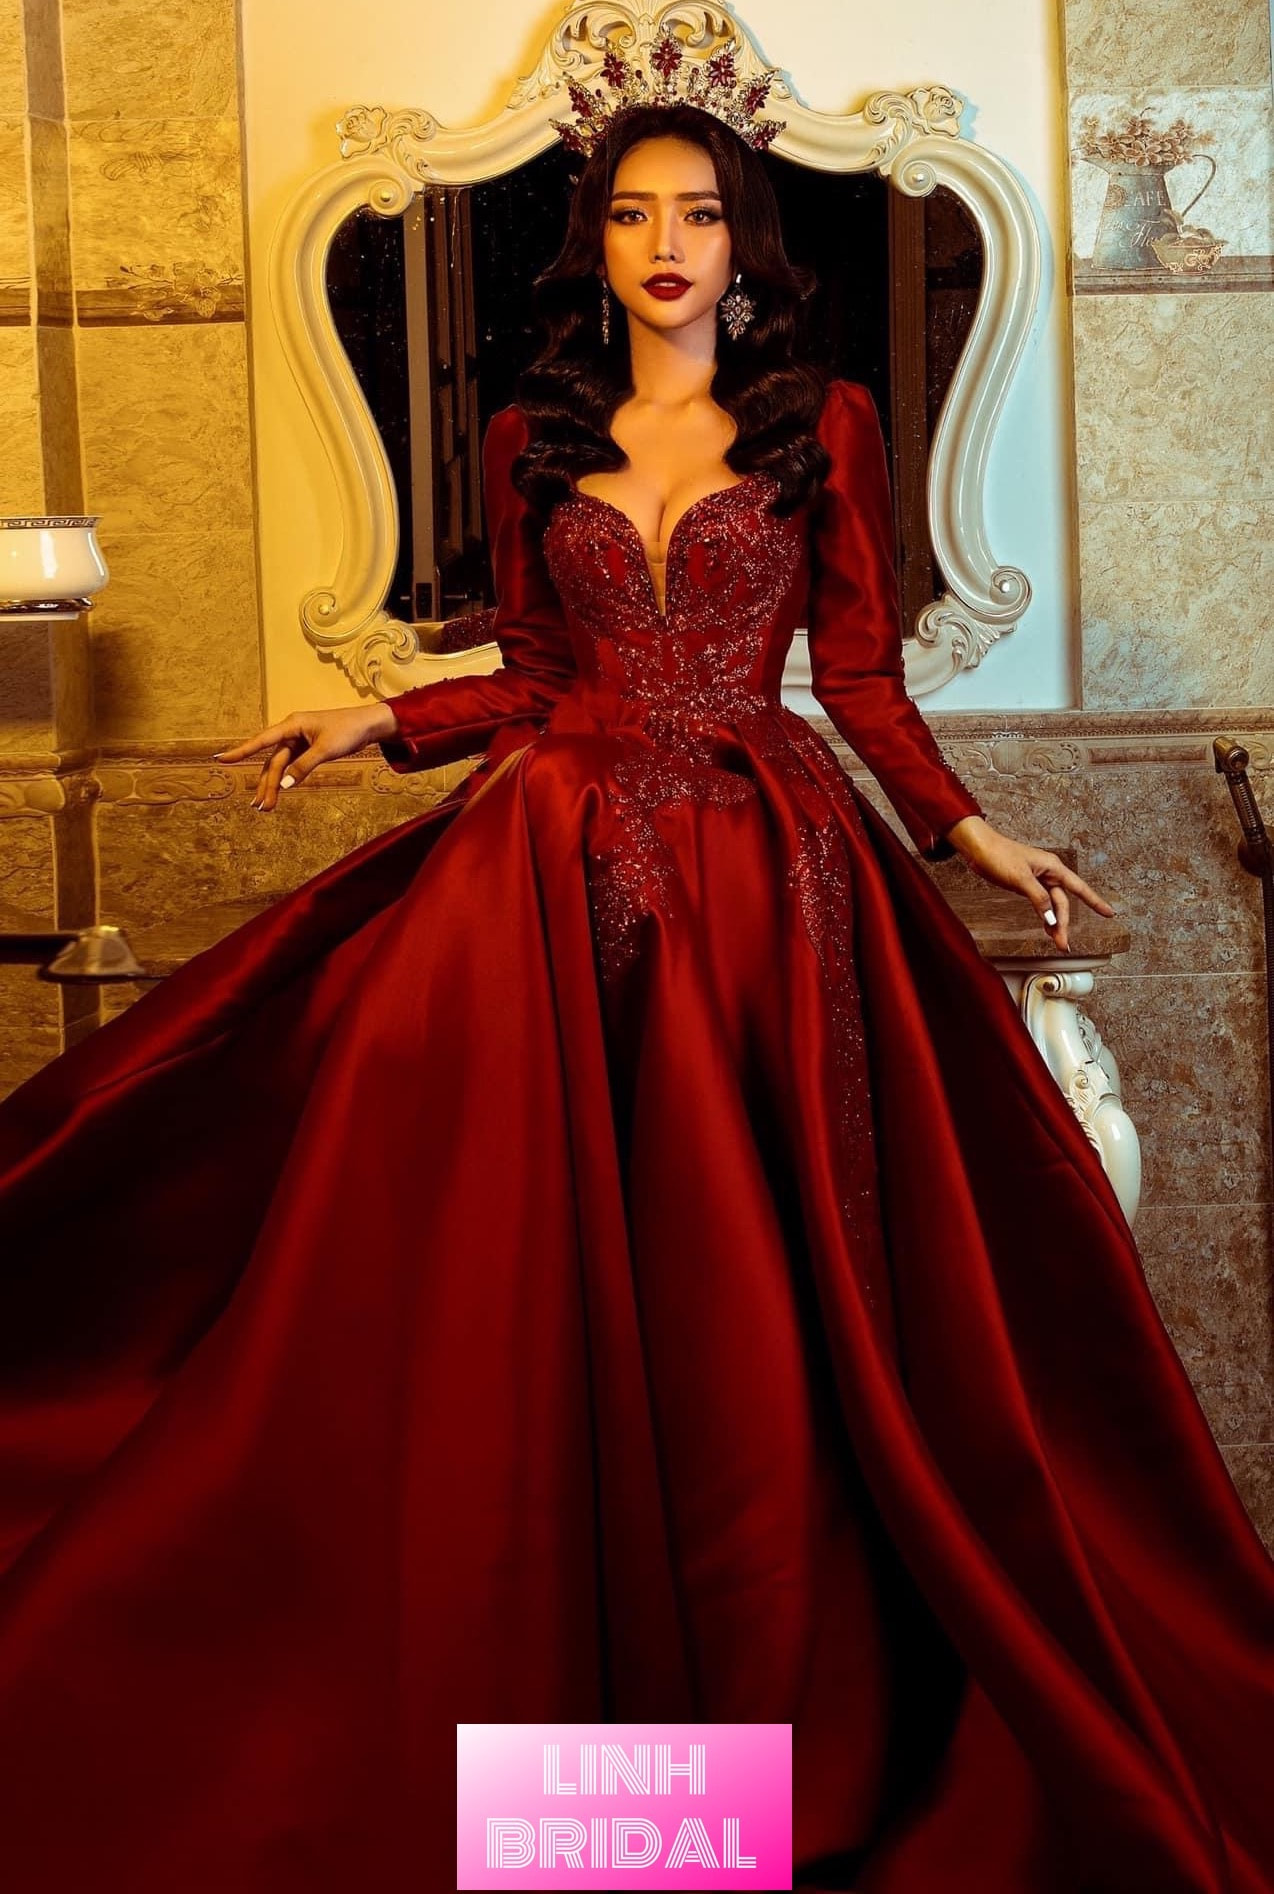 Extravagant Red Satin Ball Gown Wedding Prom Dress With Red Flower And Glitter Details